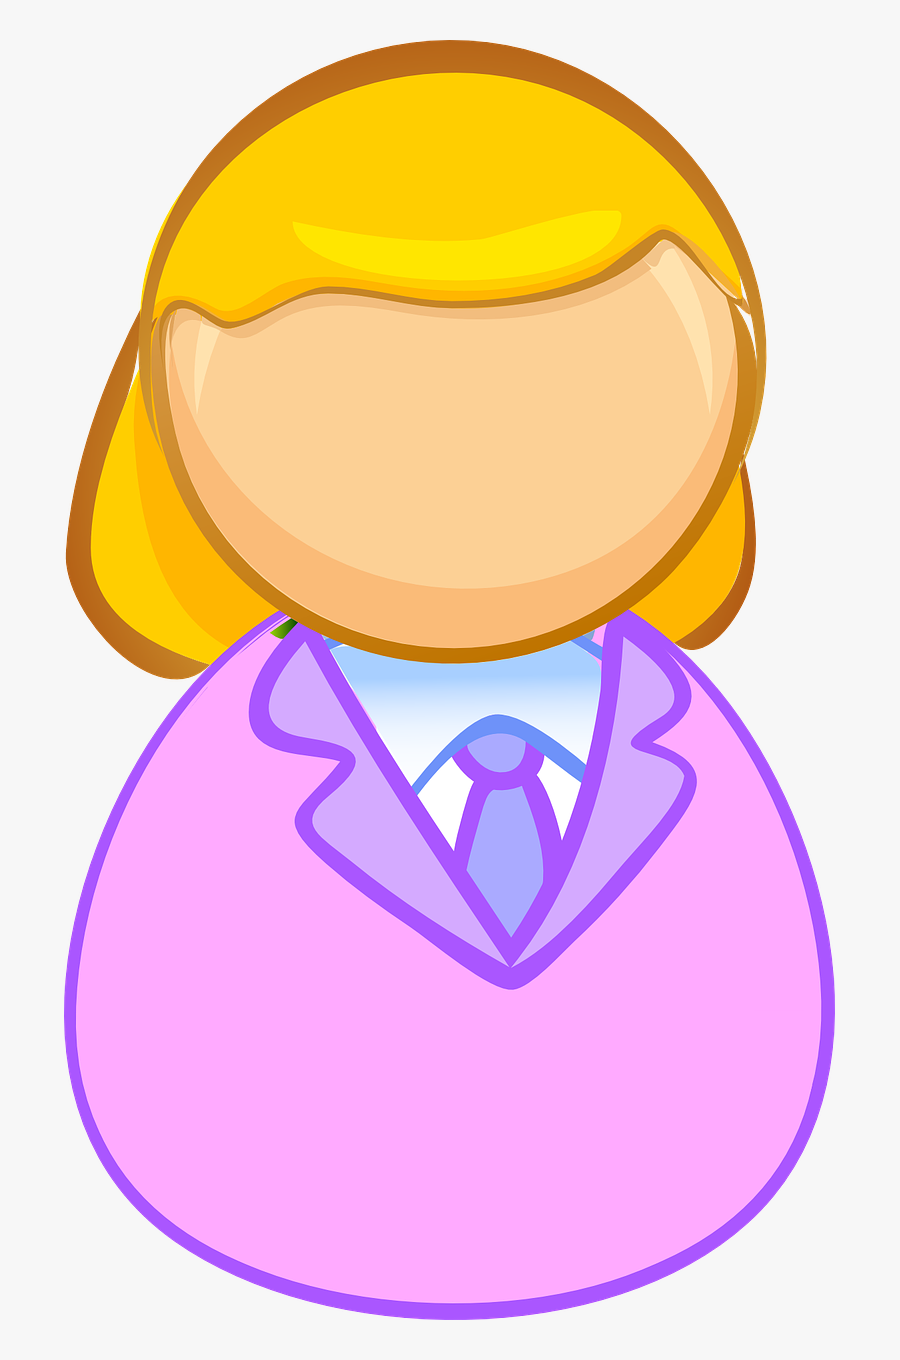 Woman Sweater Tie Free Picture - Pharmacist Png, Transparent Clipart